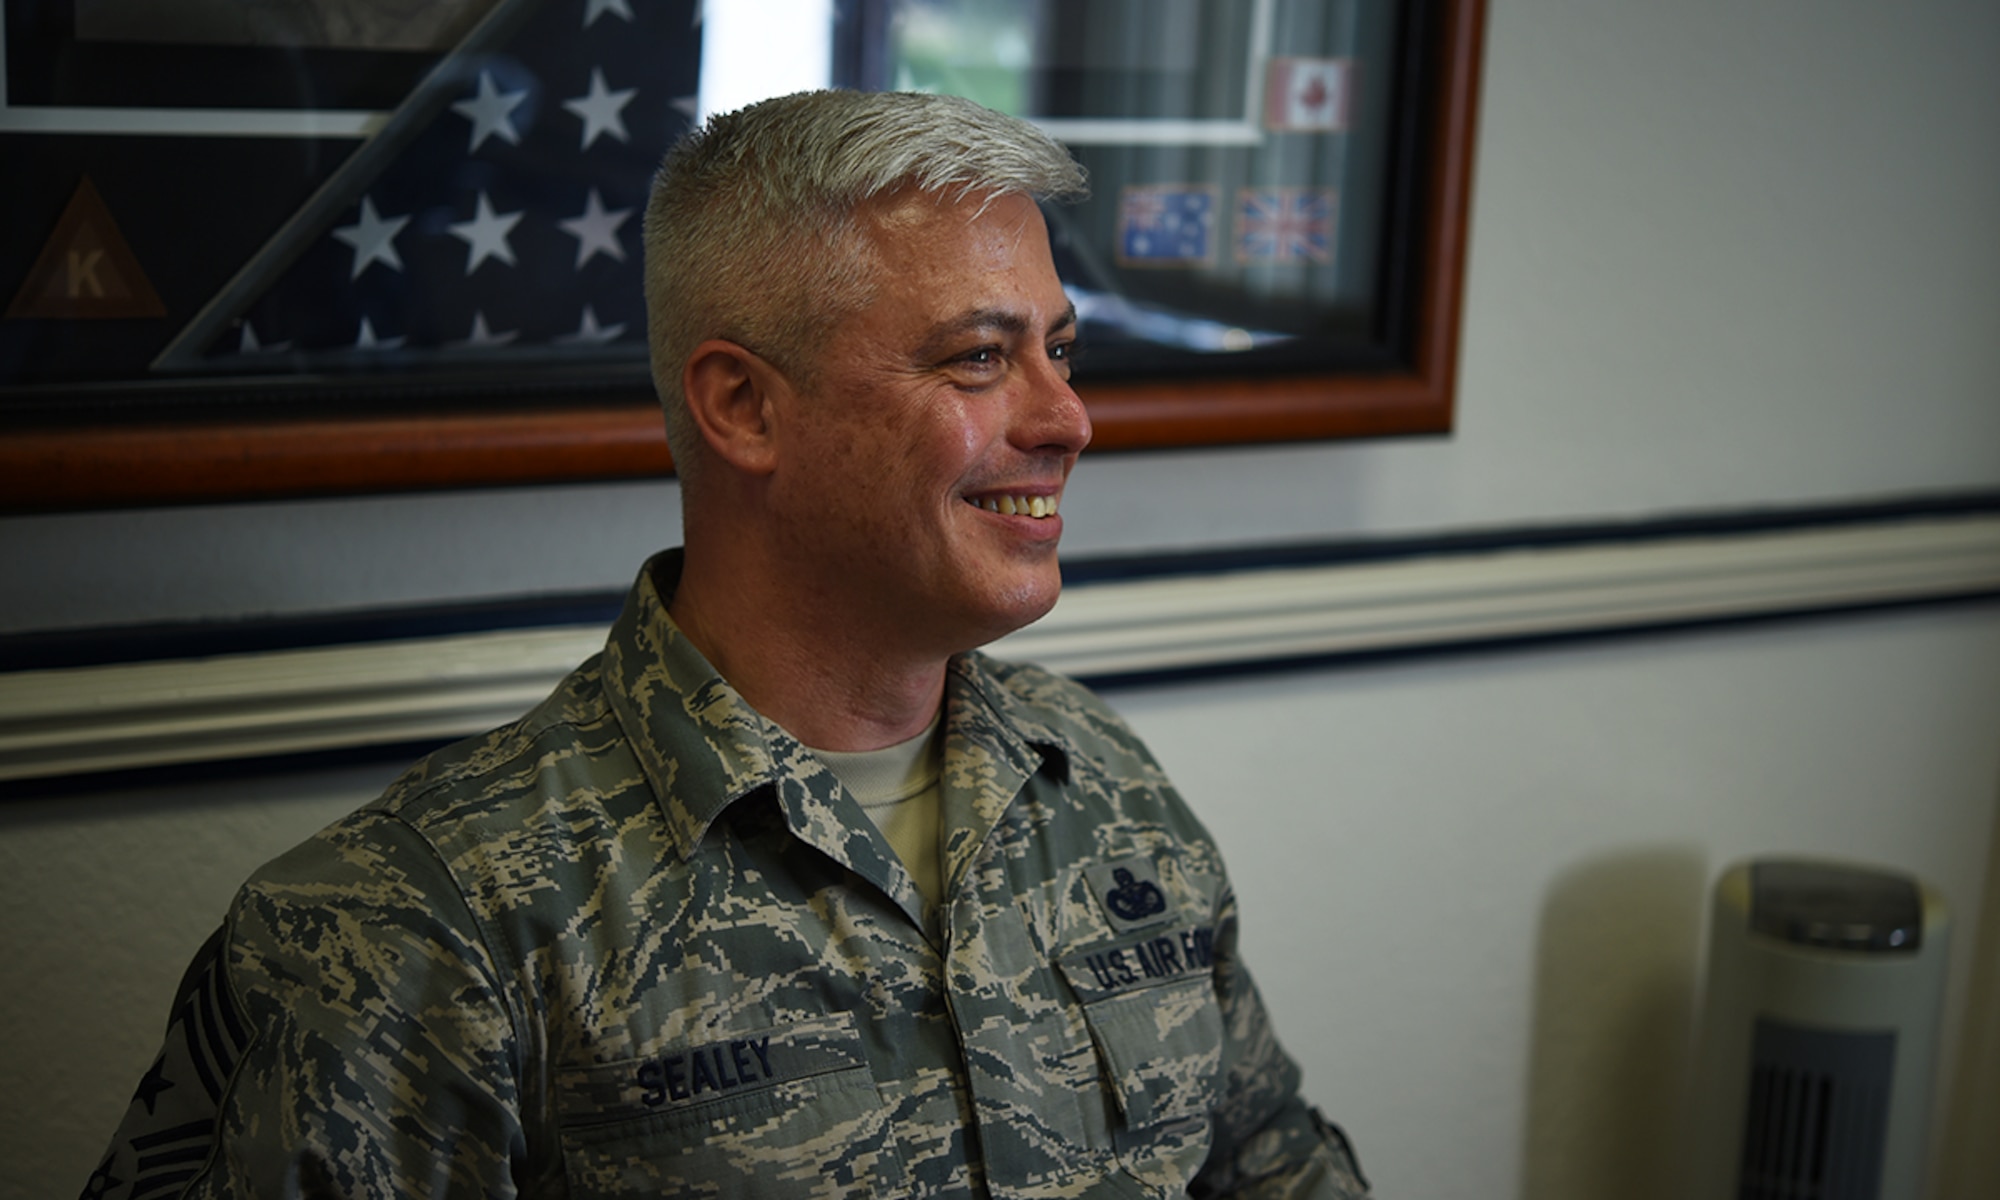 Chief Master Sgt. Robert Sealey, 501st Combat Support Wing command chief, smiles broadly, inside his office on RAF Alconbury, United Kingdom, April 28, 2016, while recalling the "best day" through his 30 year career in the U.S. Air Force. It wasn't making rank, the accolades or awards, Sealey said - it was watching his son graduate from Air Force basic military training. (U.S. Air Force photo by Tech. Sgt. Jarad A. Denton/Released)